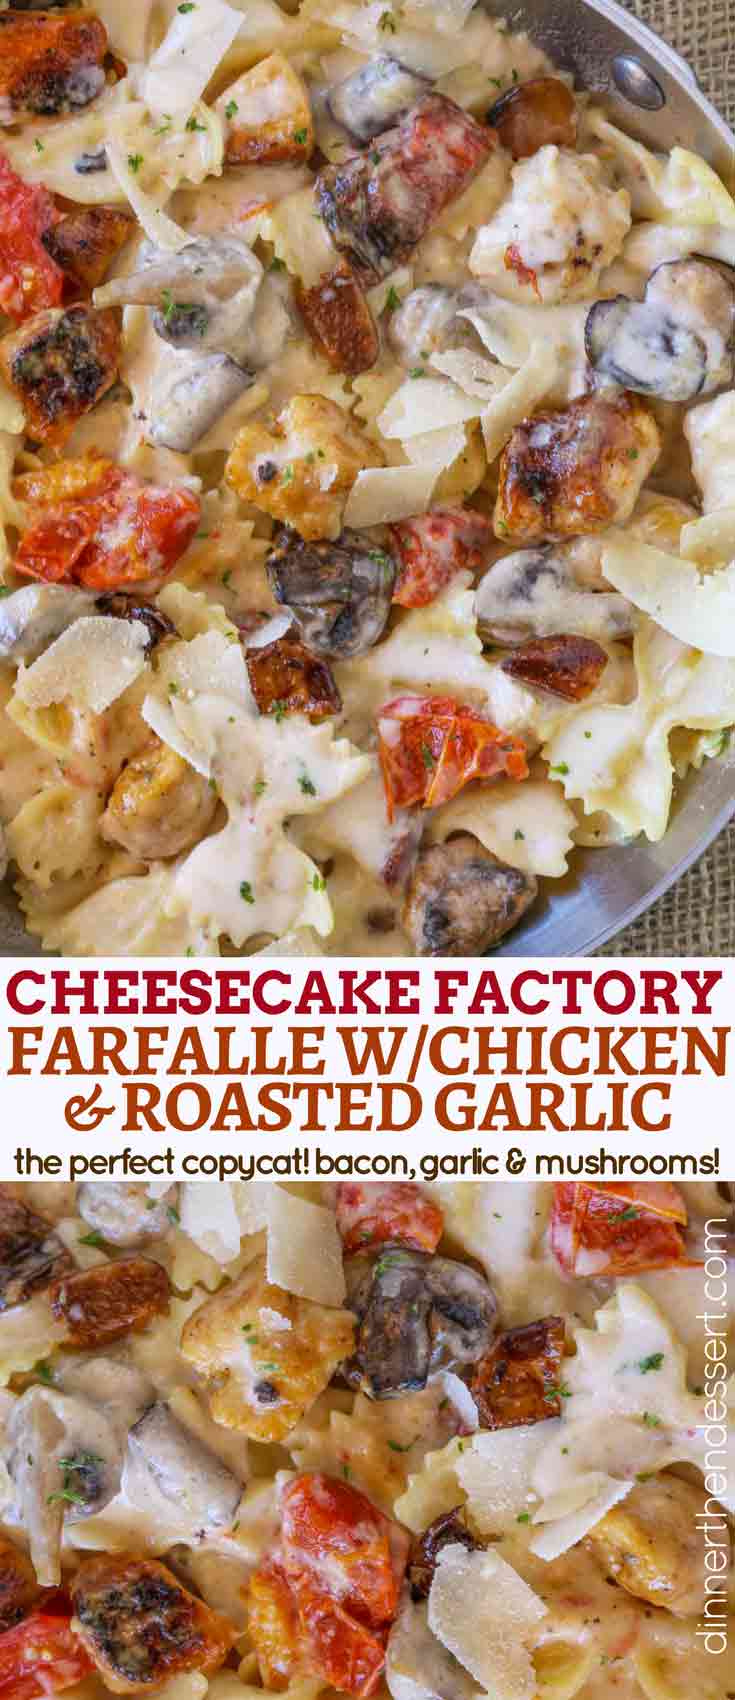 The Cheesecake Factory Farfalle with Chicken and Roasted Garlic